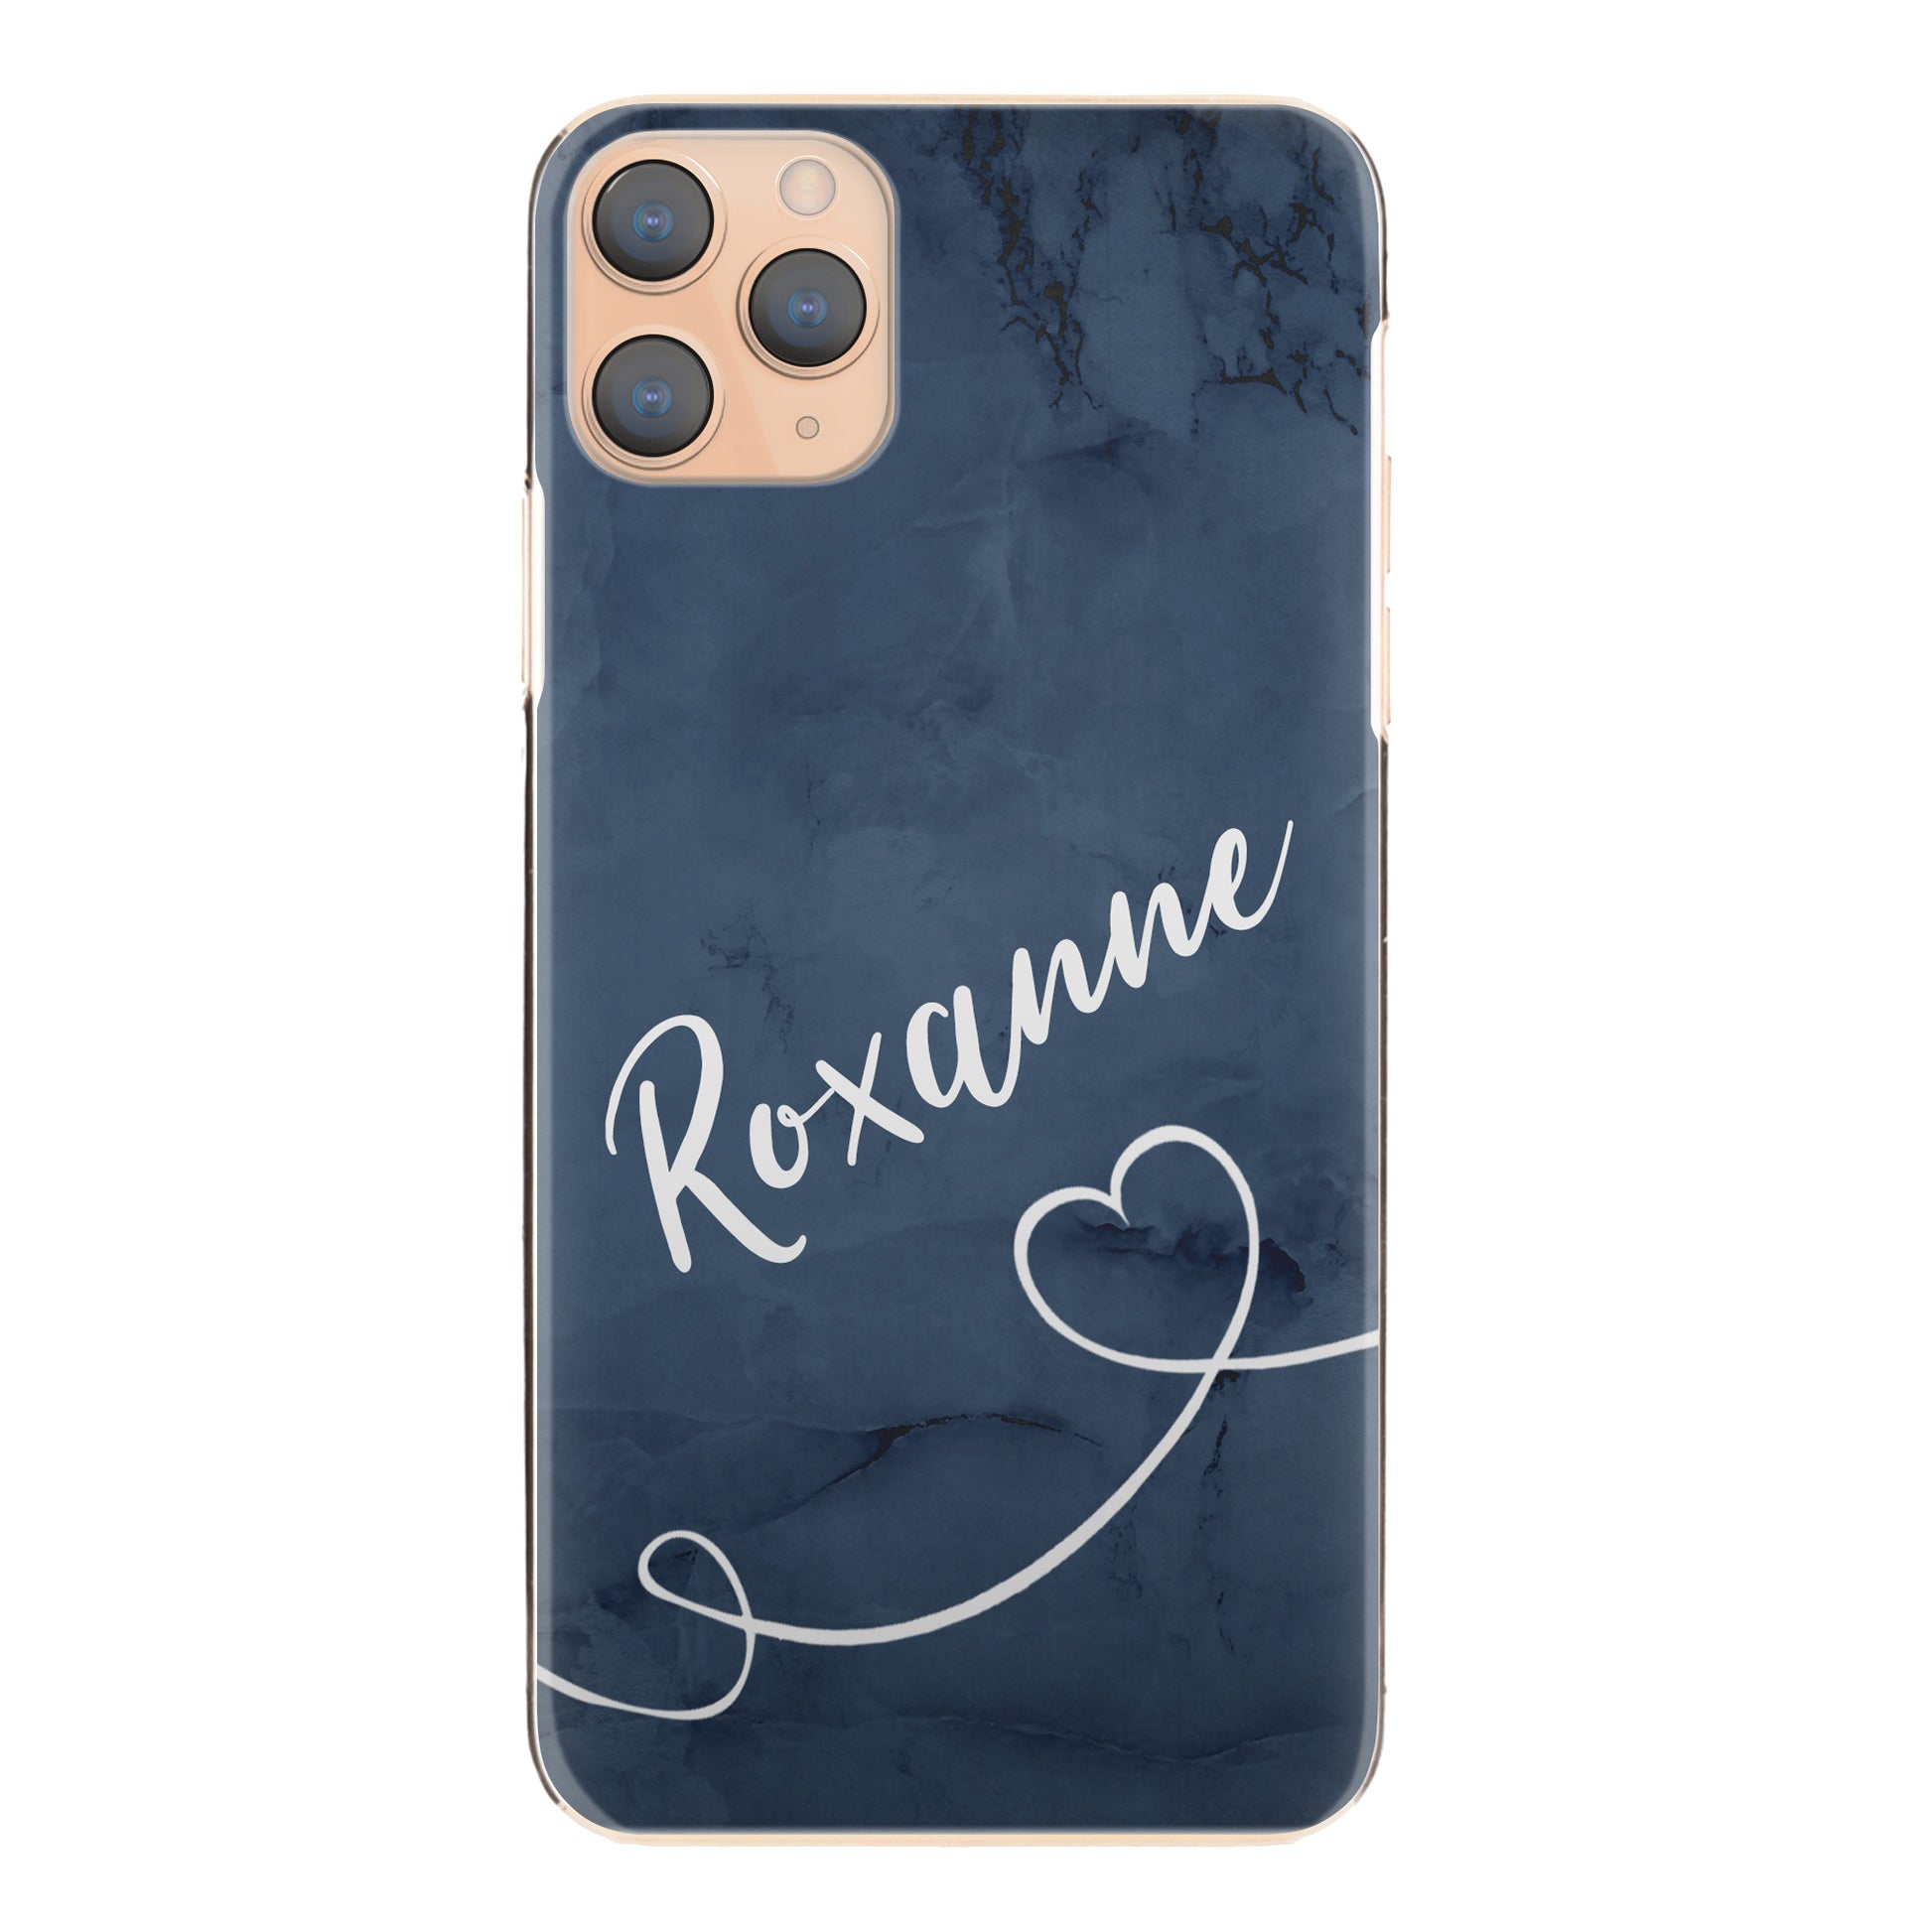 Personalised Xiaomi Phone Hard Case with Stylish Text and Heart Line on Blue Marble